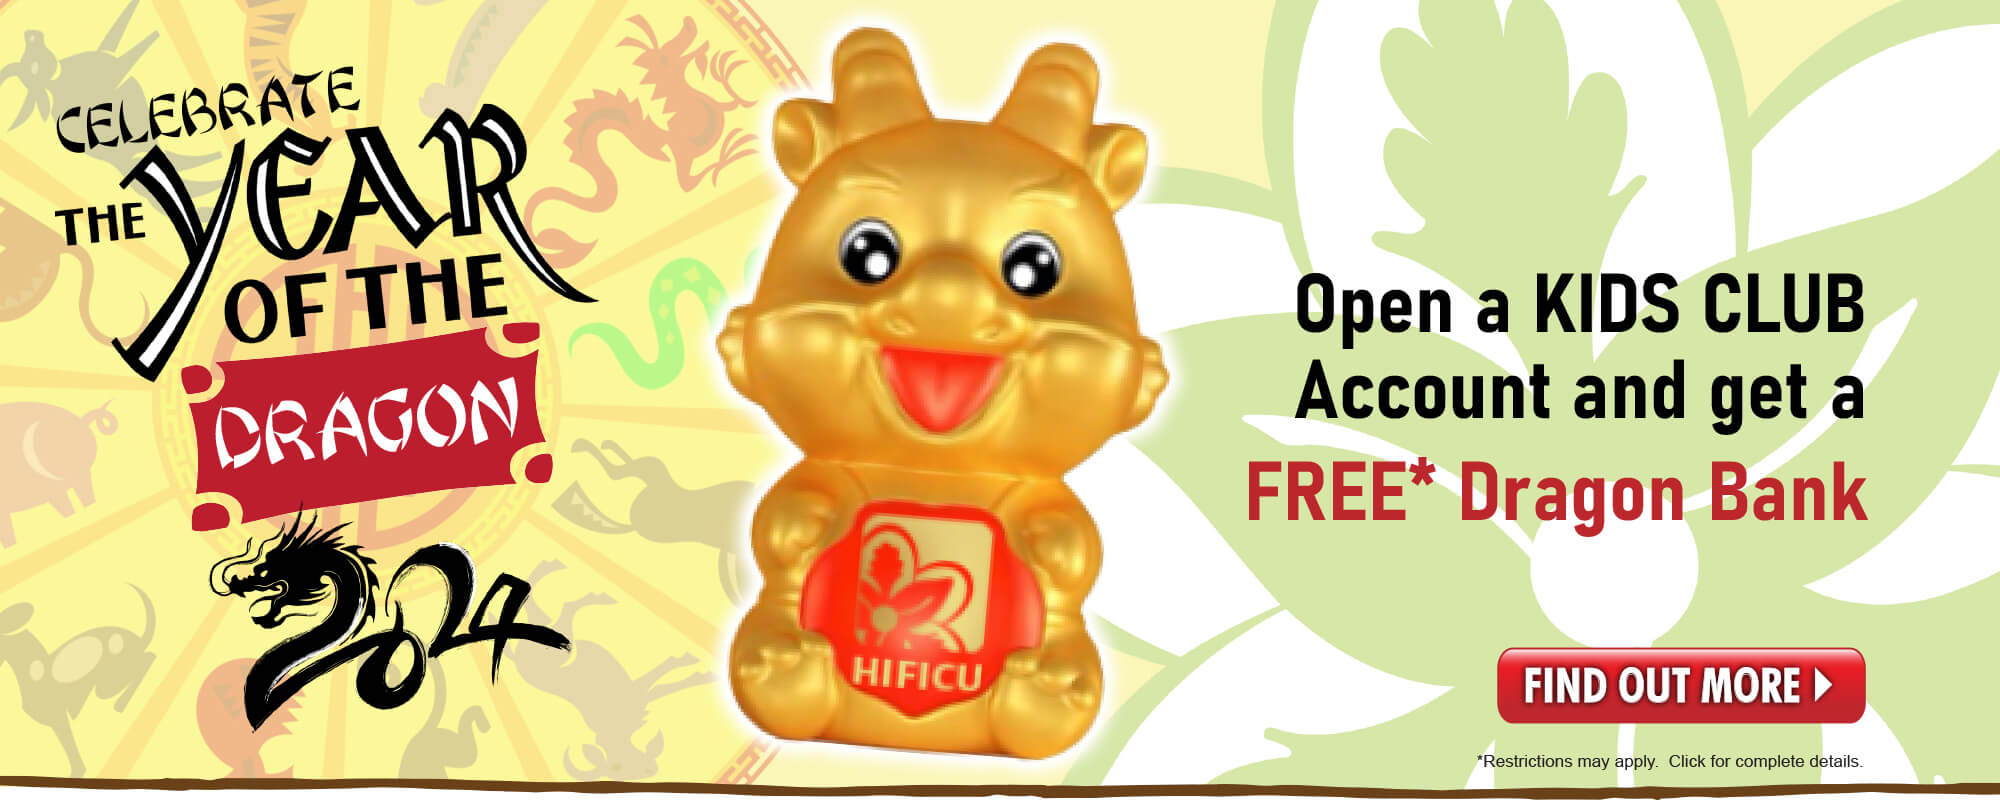 Celebrate the Year of the Dragon!  Open a Kids Club account with at least $100 and get a FREE Dragon Bank!